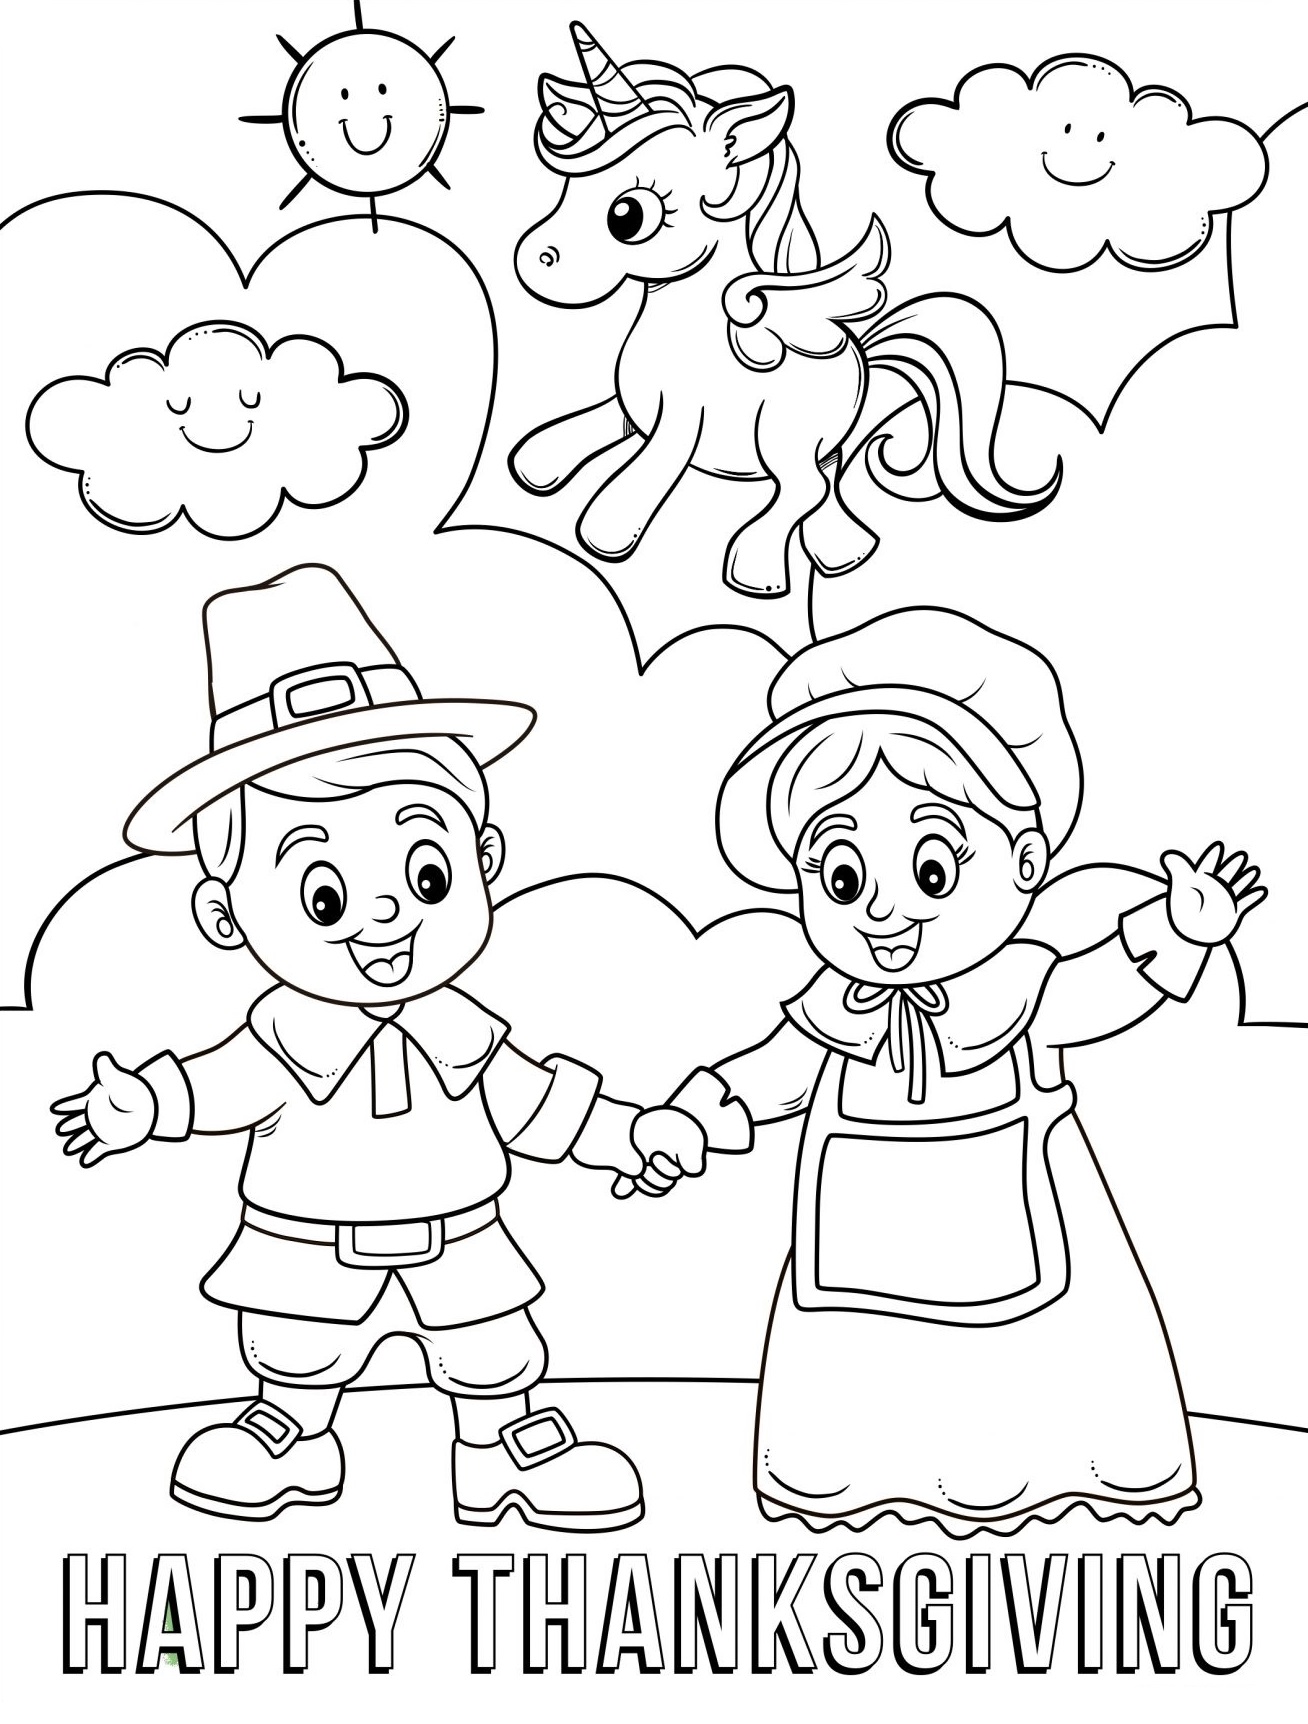 Happy Thanksgiving Unicorn And Pilgrims Coloring Page